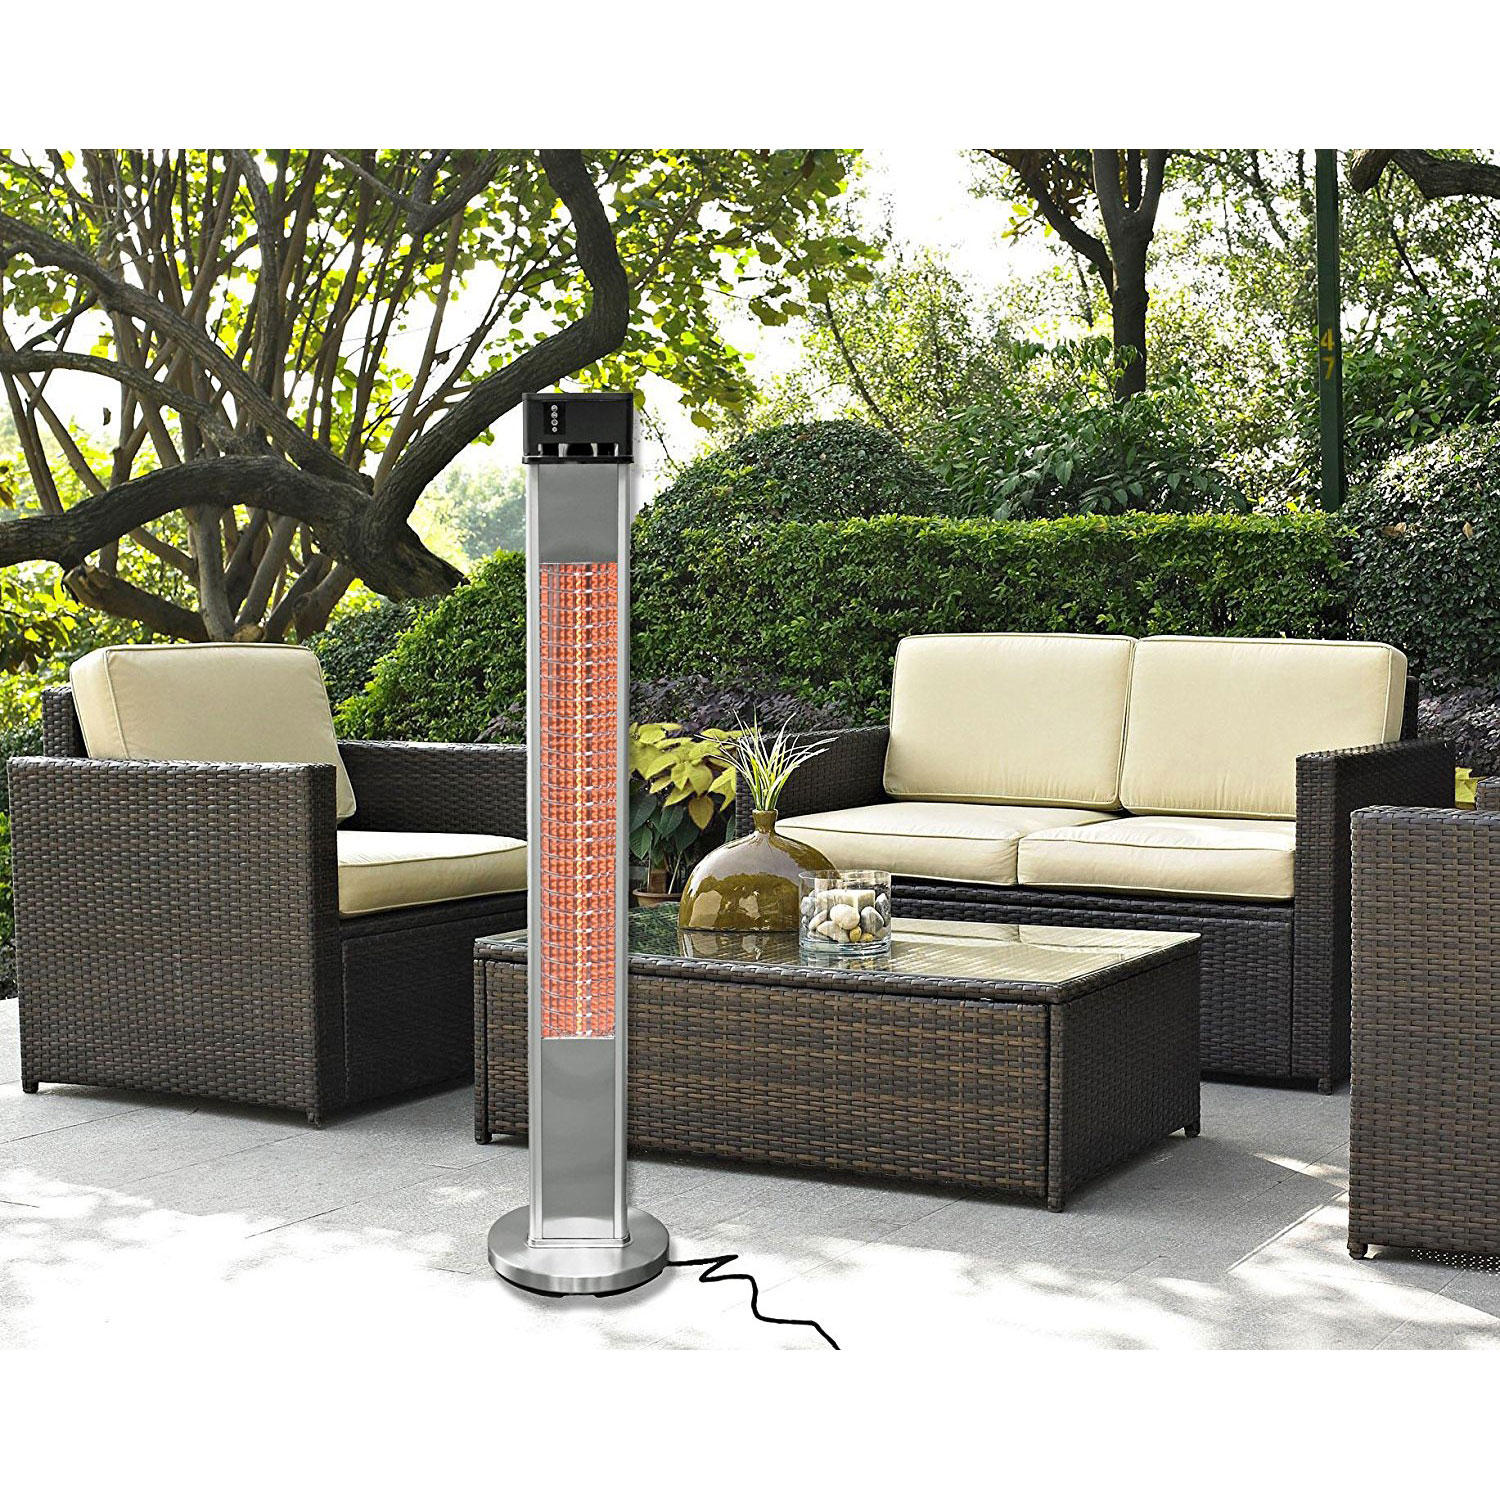 Westinghouse WES31-15110 1500W Freestanding Electric Patio Heater